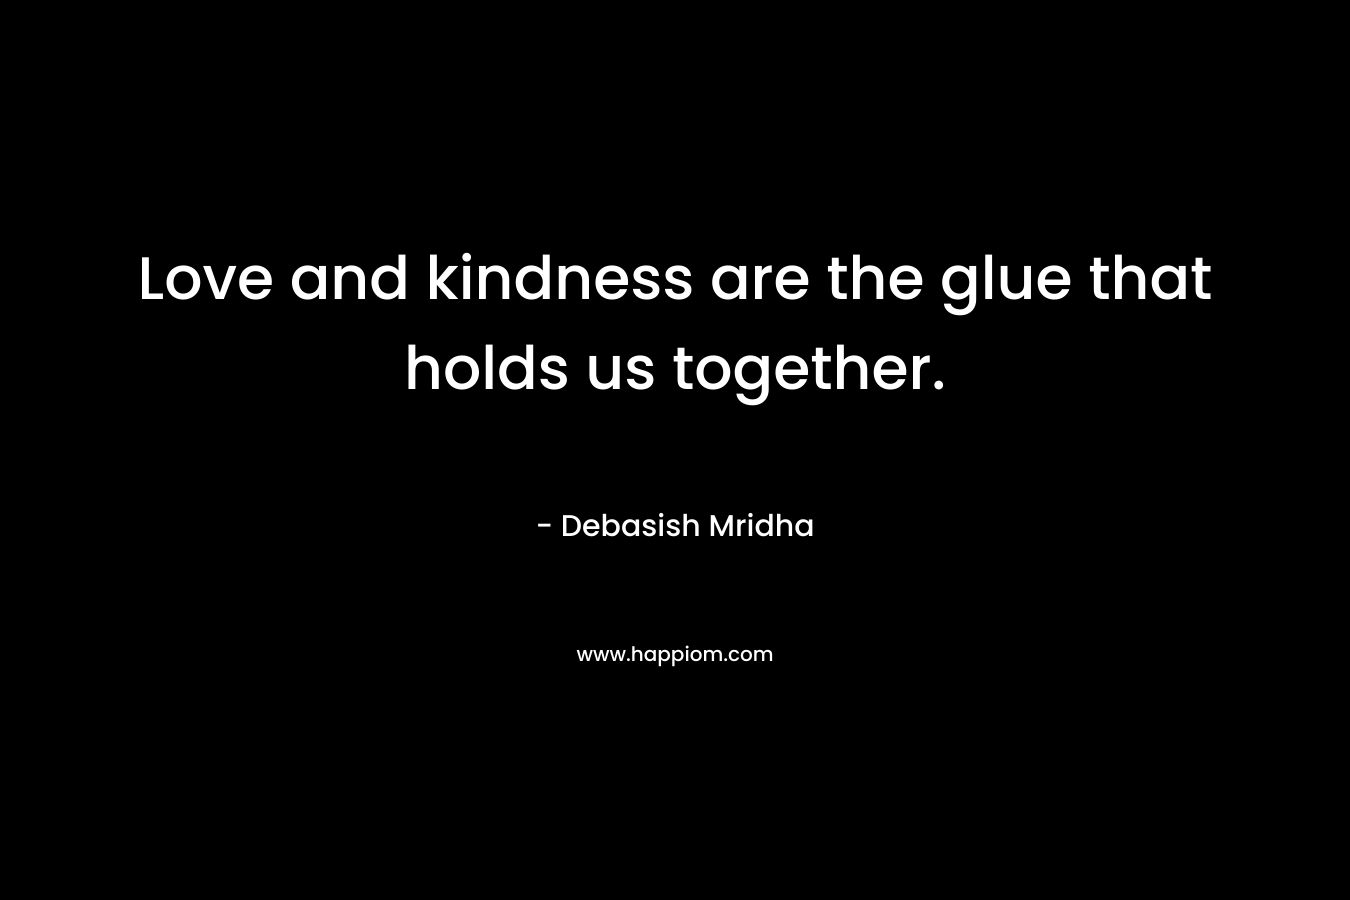 Love and kindness are the glue that holds us together.